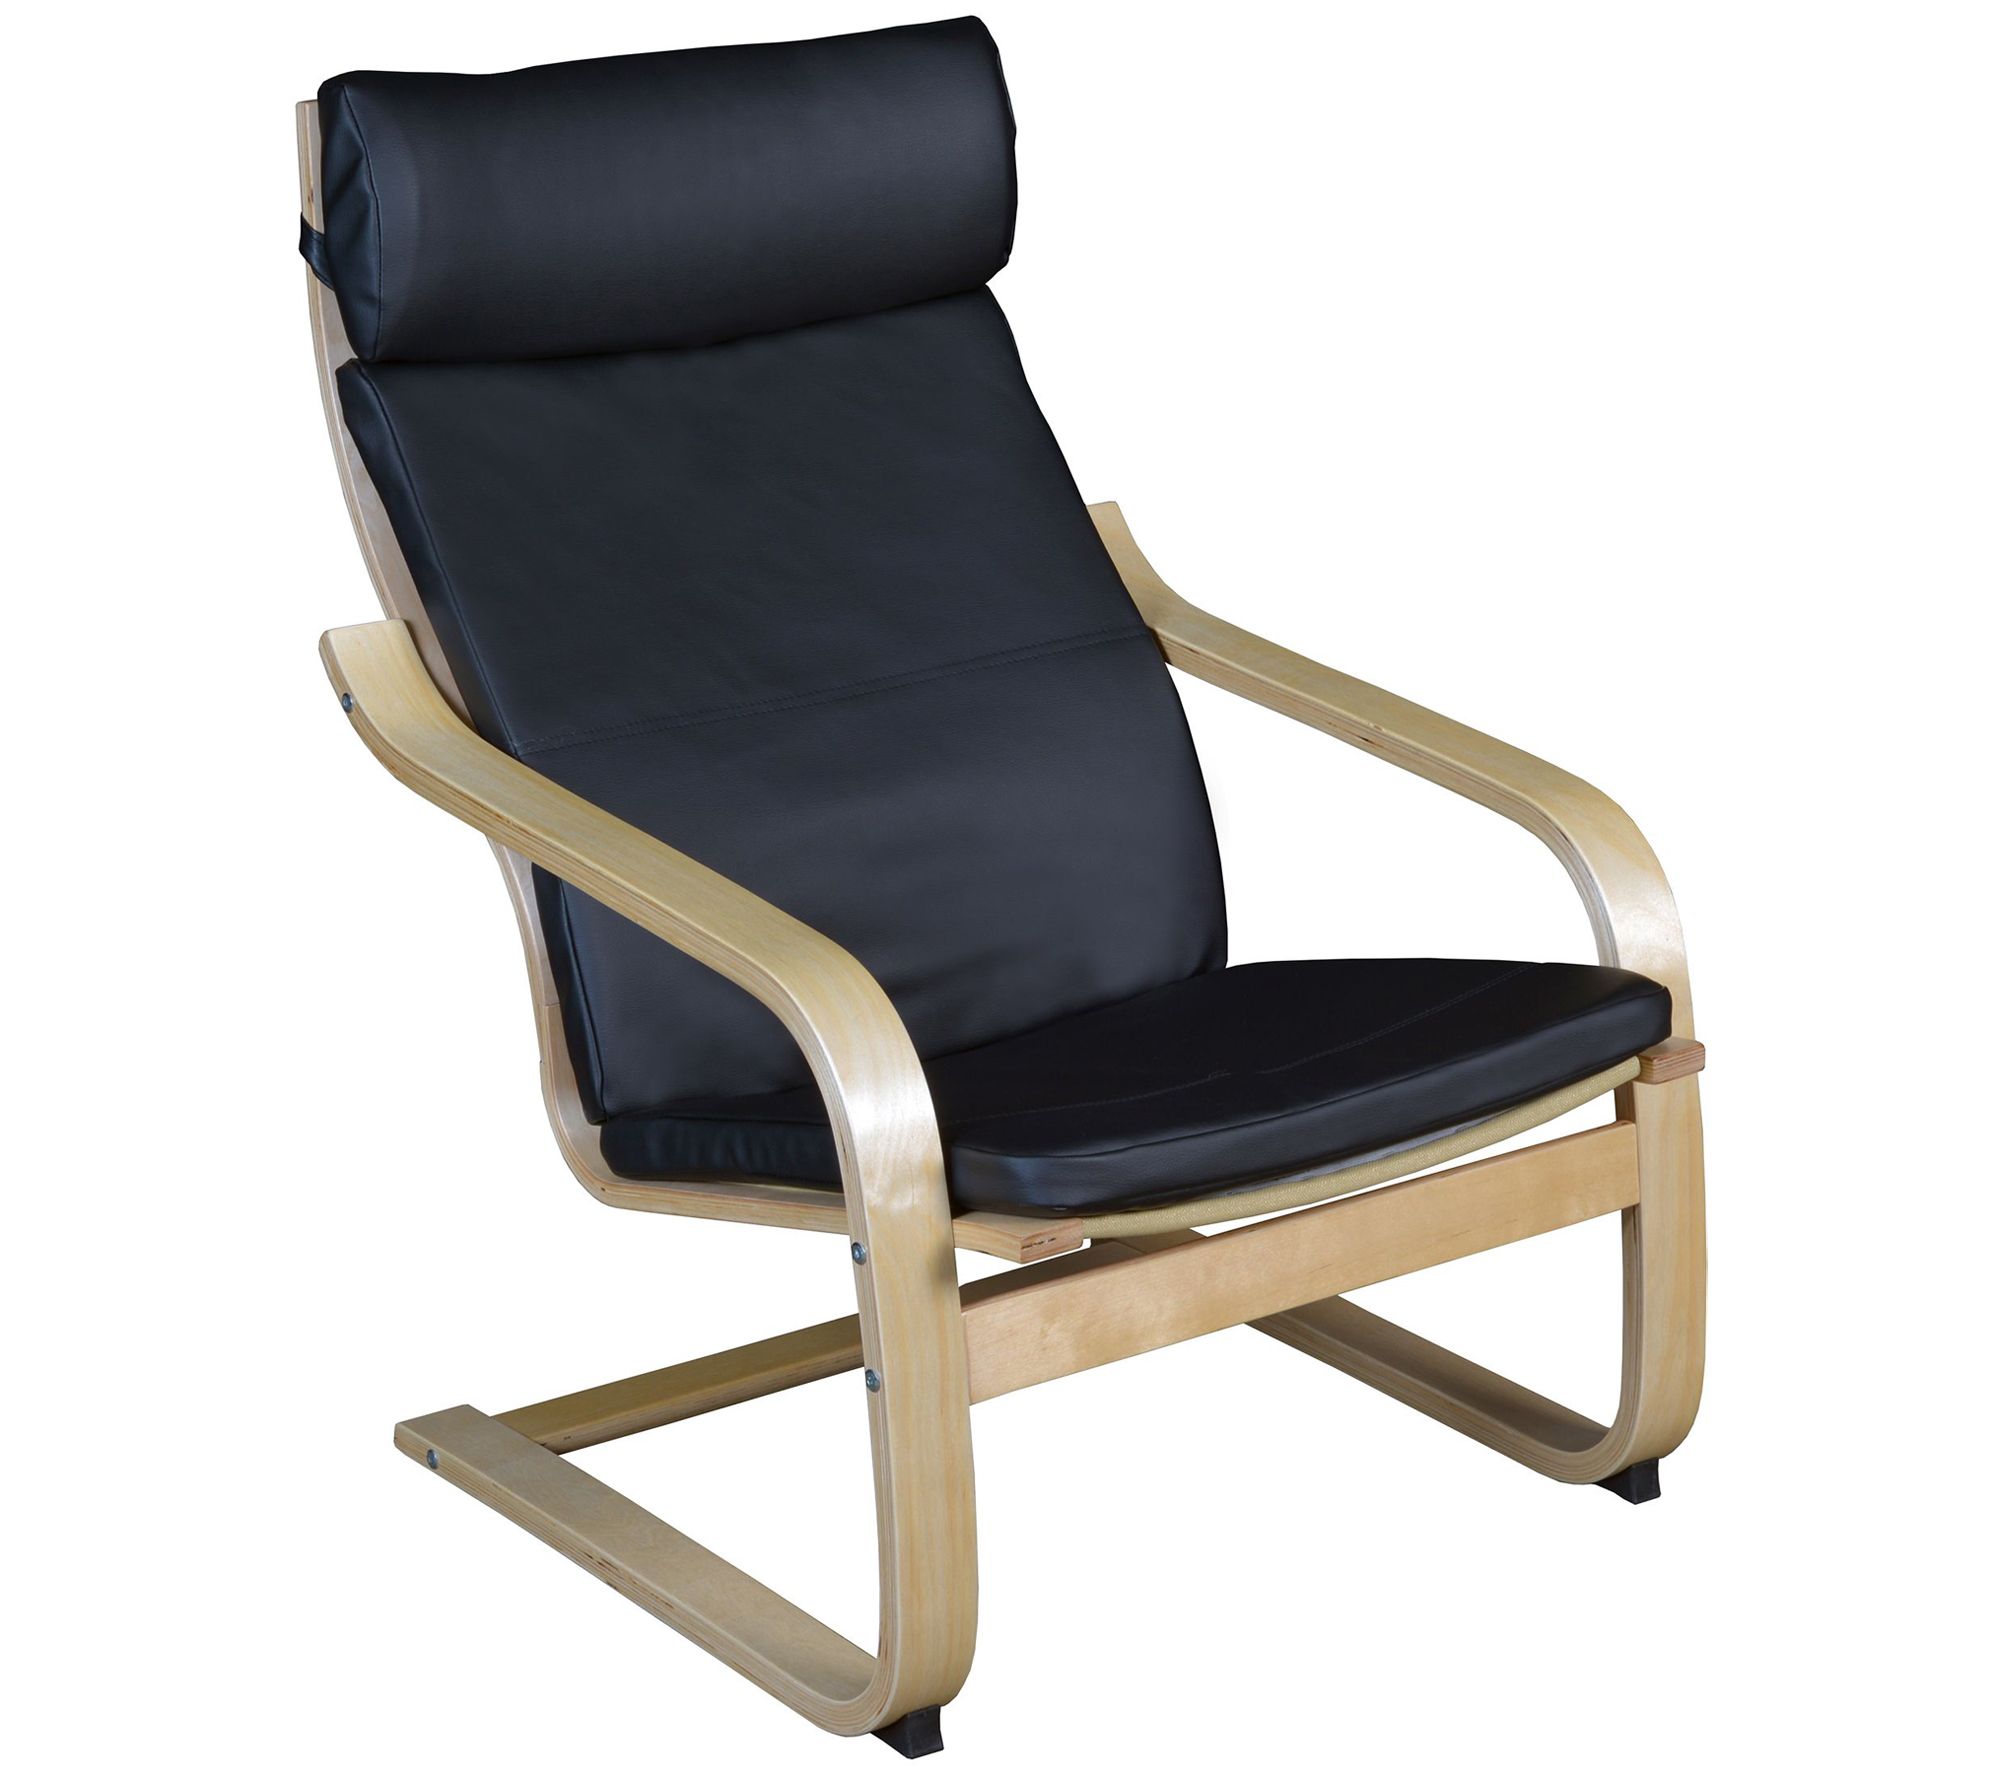 Niche Mia Bentwood Reclining Chair- Natural/ Black Leather - QVC.com